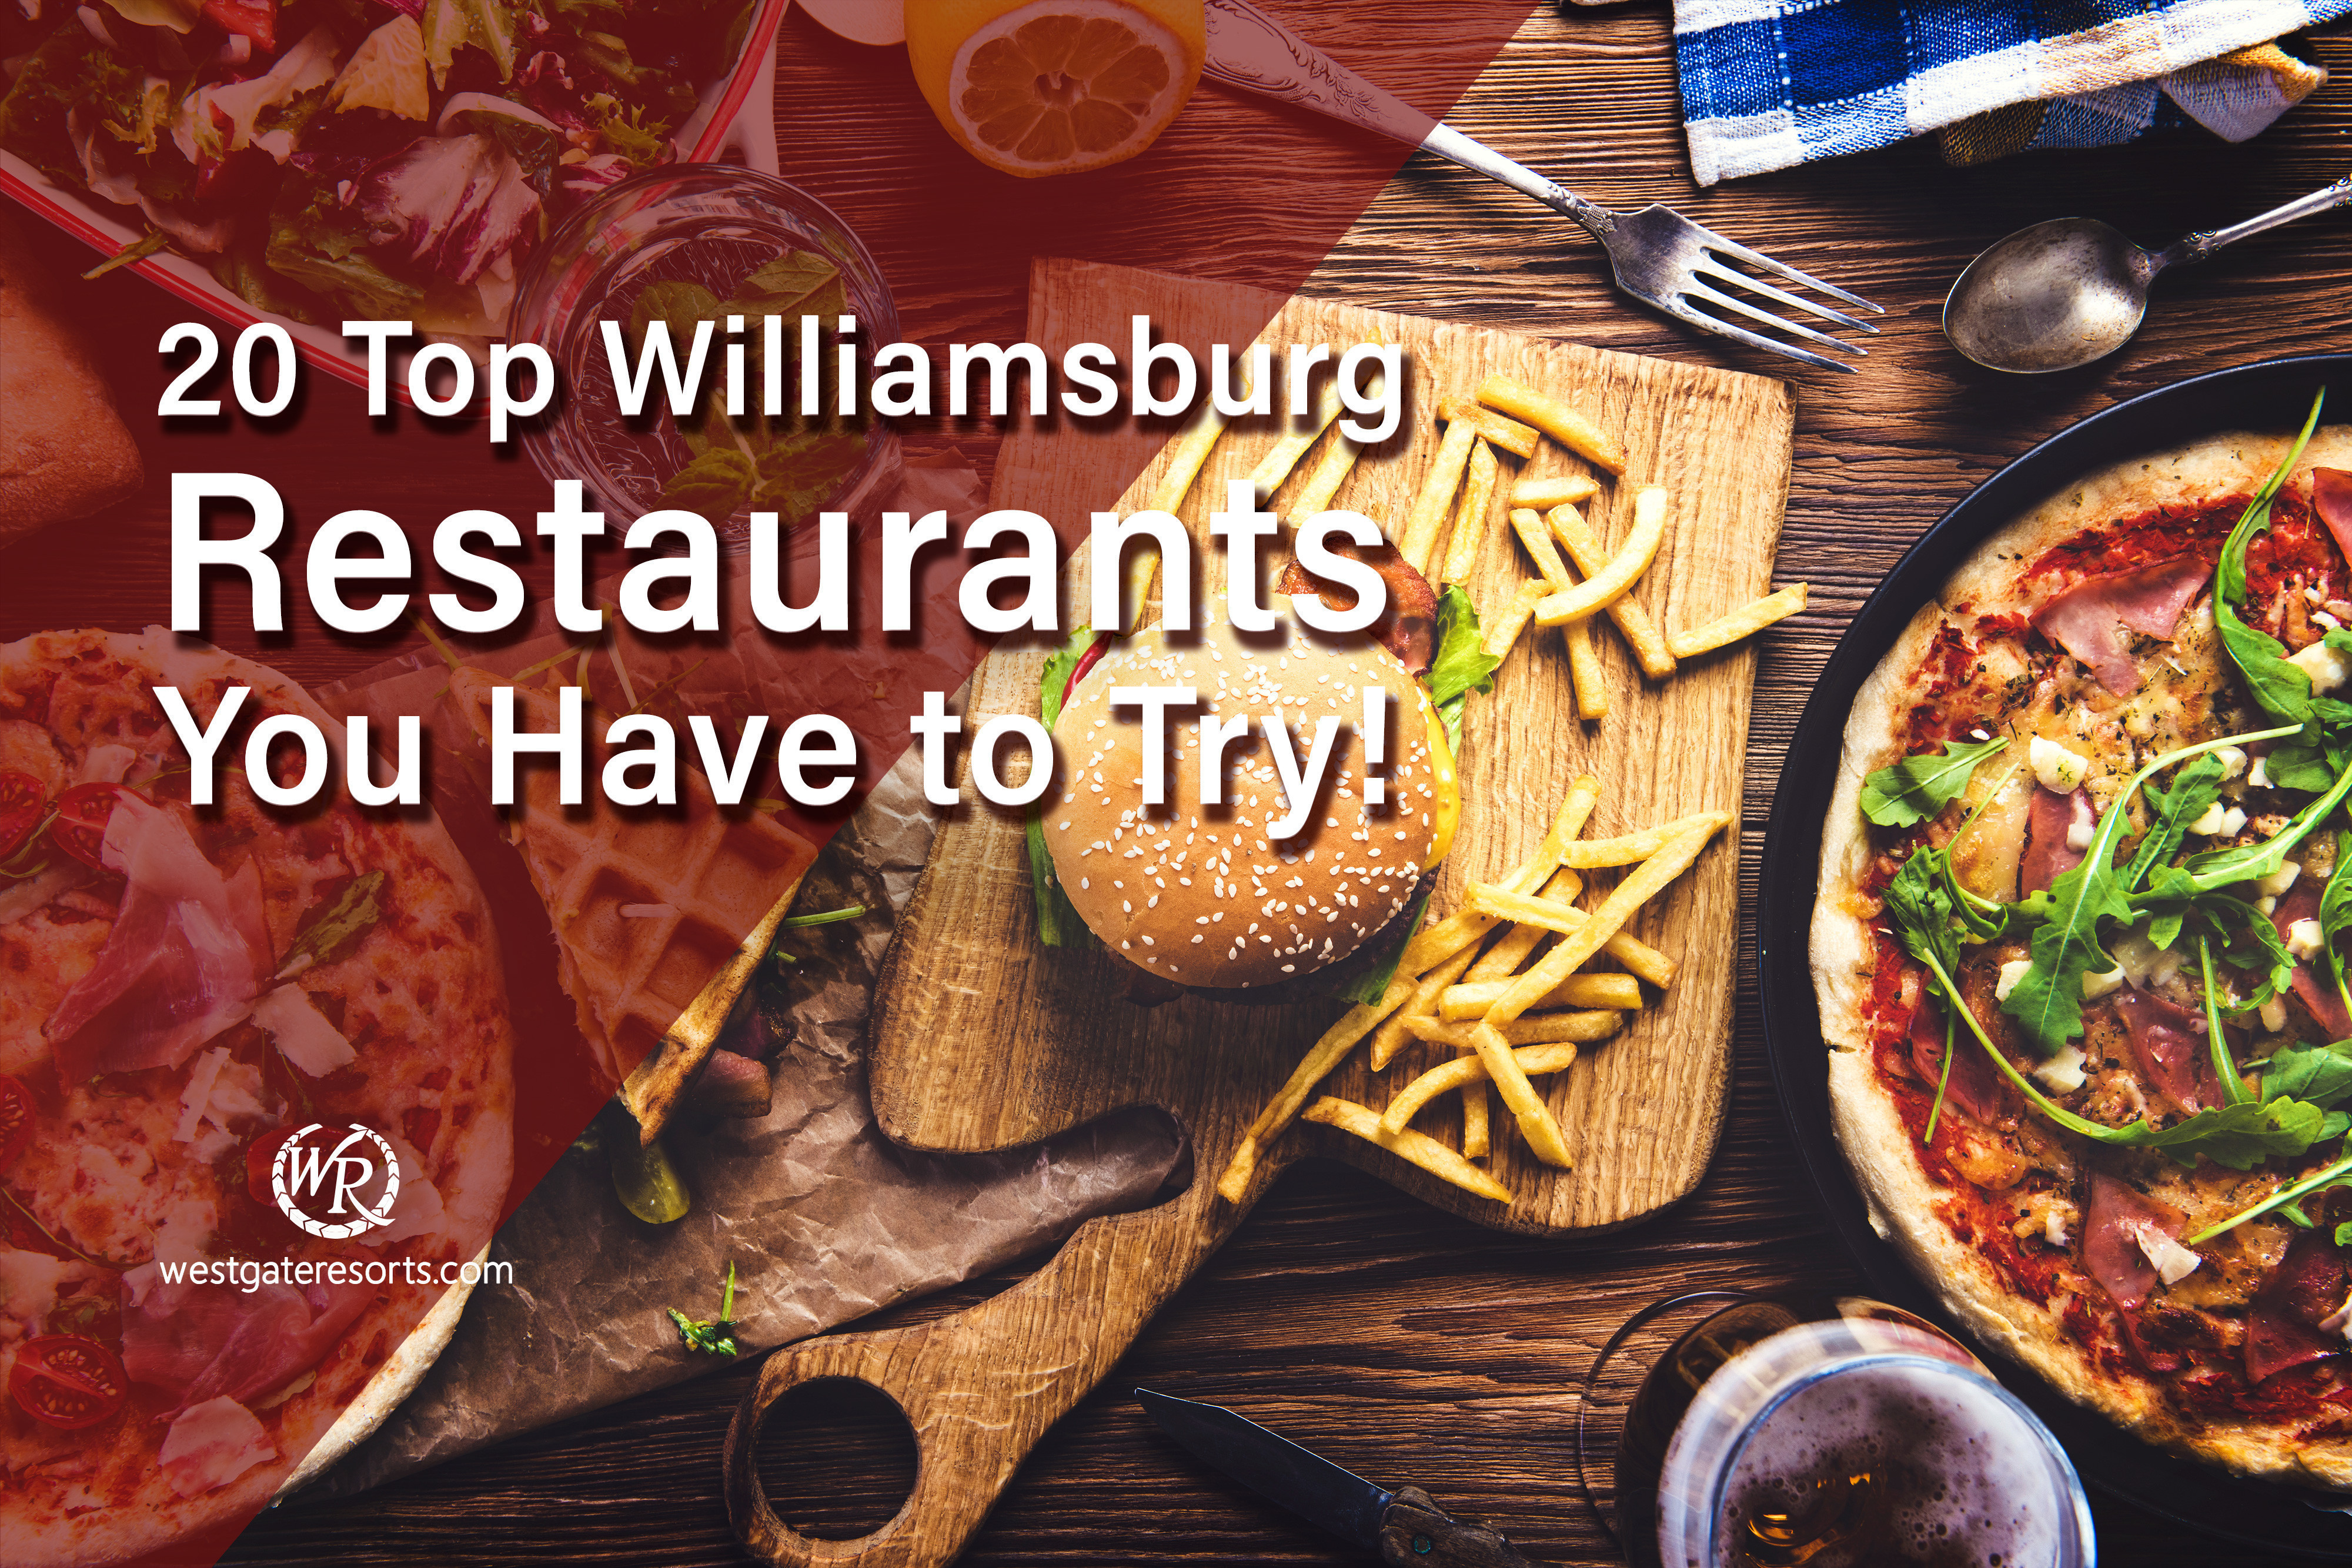 20 Top Williamsburg Restaurants You Have to Try!